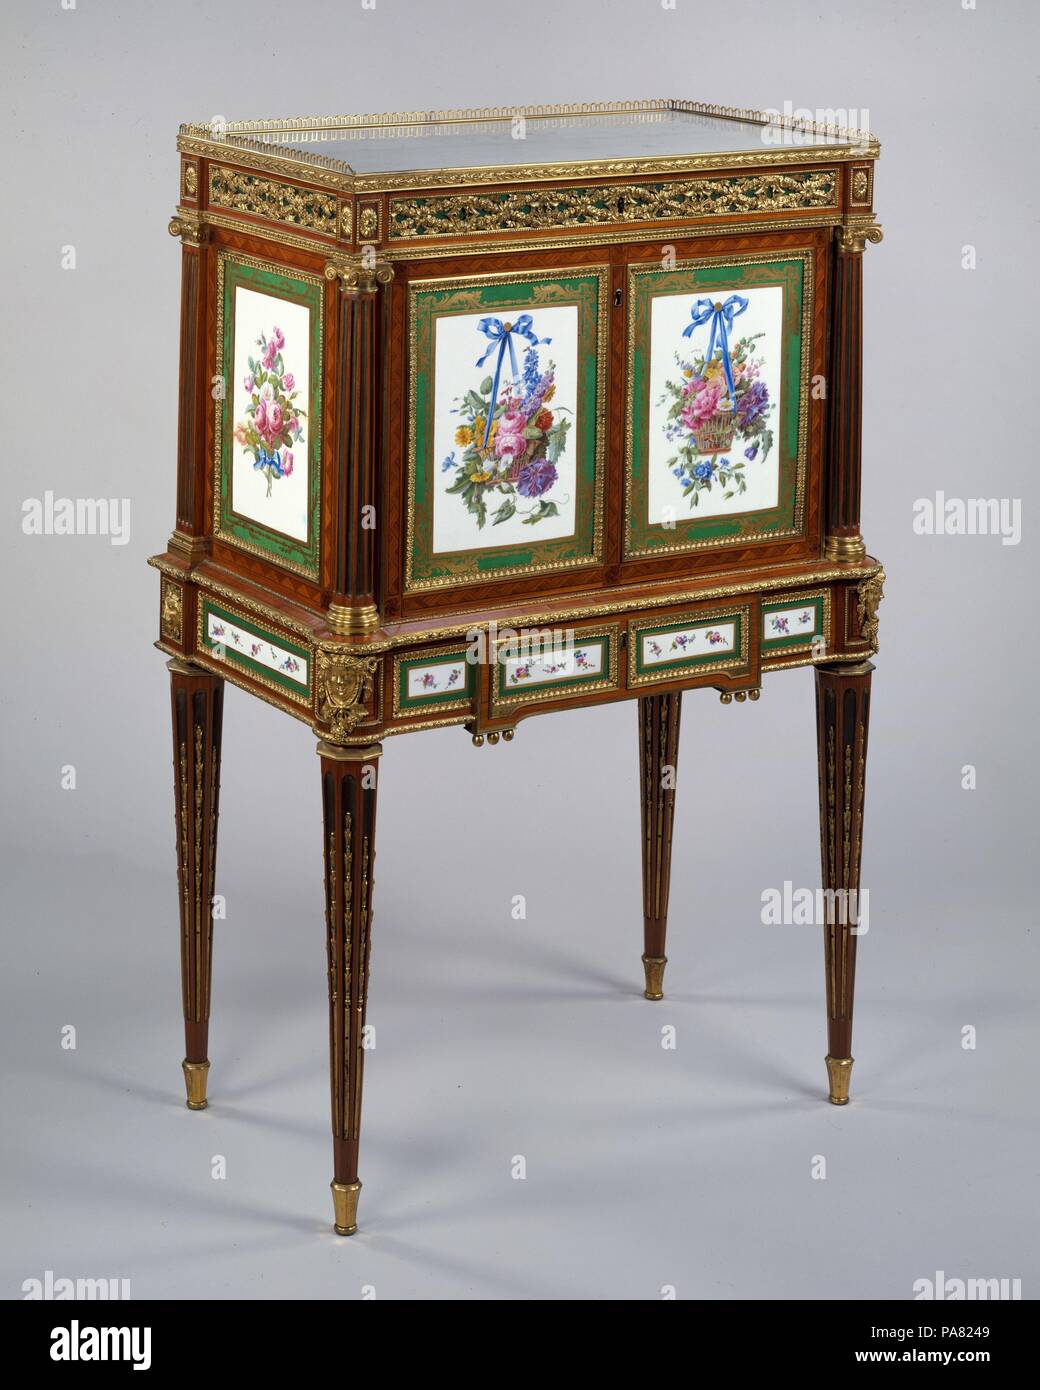 Secretary. Artist: Attributed to Martin Carlin (French, near Freiburg im Breisgau ca. 1730-1785 Paris); Sèvres Manufactory (French, 1740-present) (soft-paste porcelain plaques); various French painters, Paris (soft-paste porcelain plaques). Dimensions: H. 120.3 cm, W. 80 cm, D. 45.7 cm. Date: ca. 1781-85.  This upright rectangular drop-front secrétaire is thought to have come from the Parisian workshop of the French cabinetmaker ("maitre-ébeniste") Martin Carlin. From his quarters in the Rue de Faubourg Saint-Antoine, Carlin produced writing-desks, commodes, and secretaires inset with porcelai Stock Photo